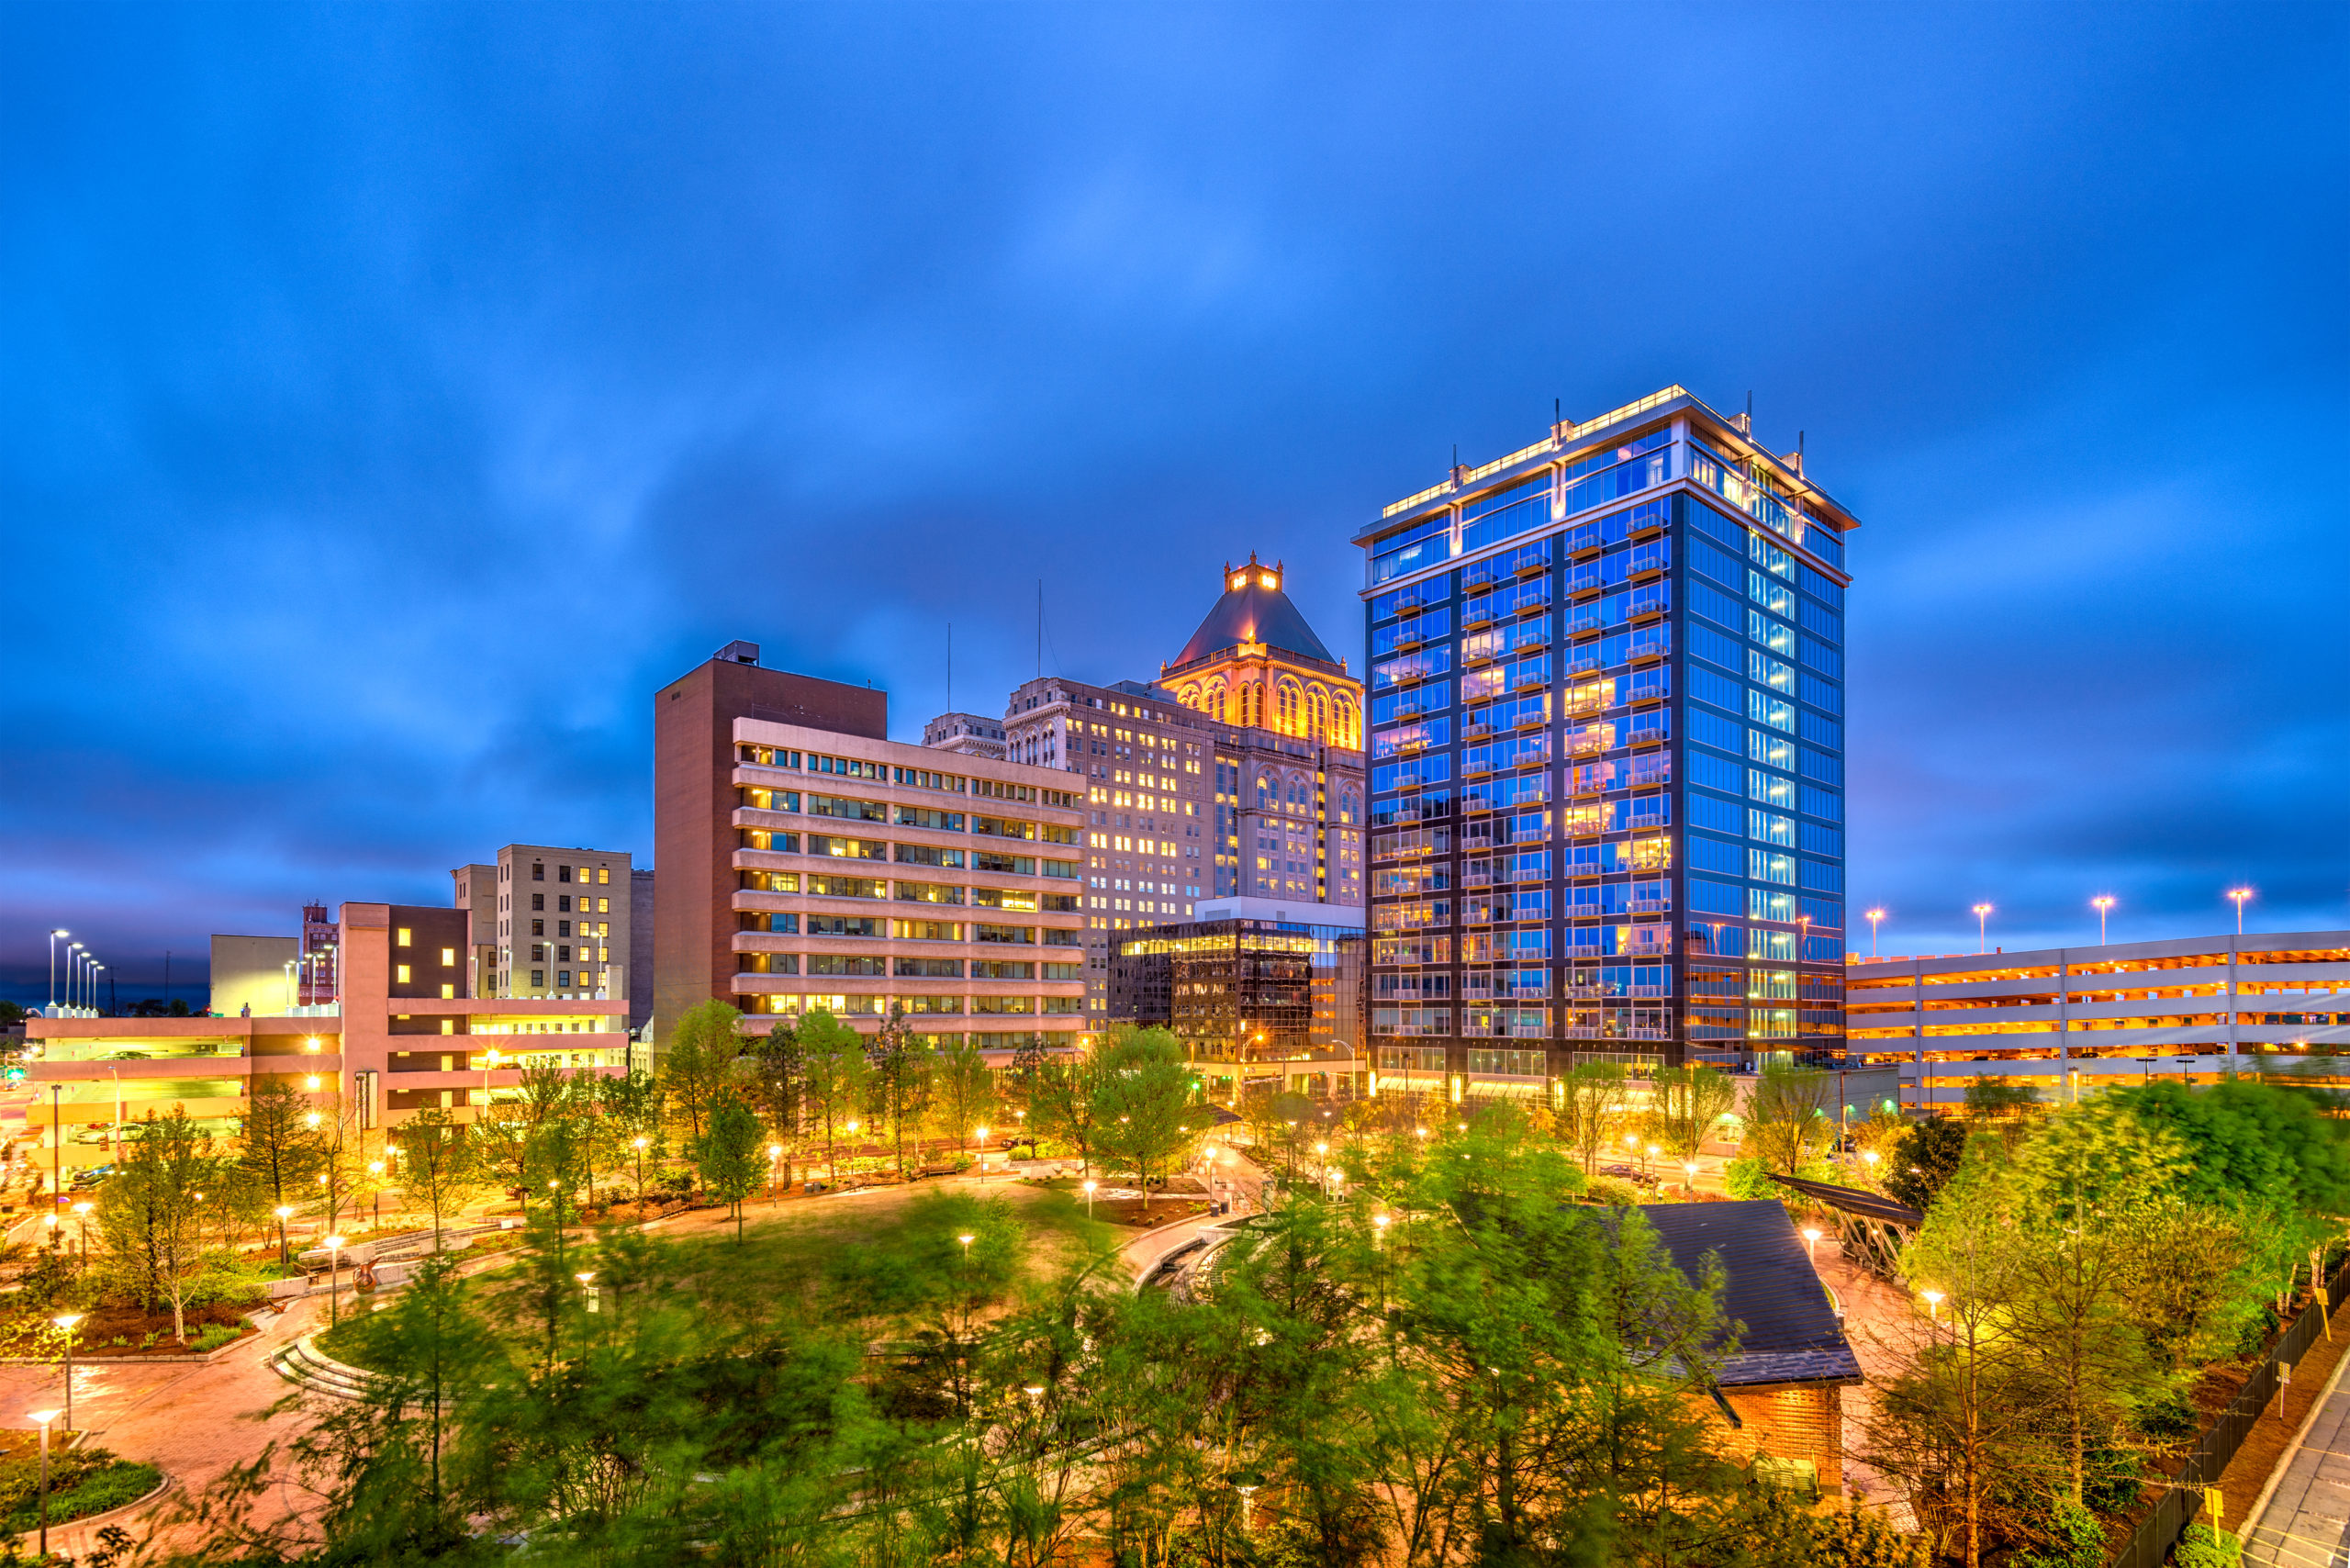 20 Things You Need to Know Before Moving to Greensboro